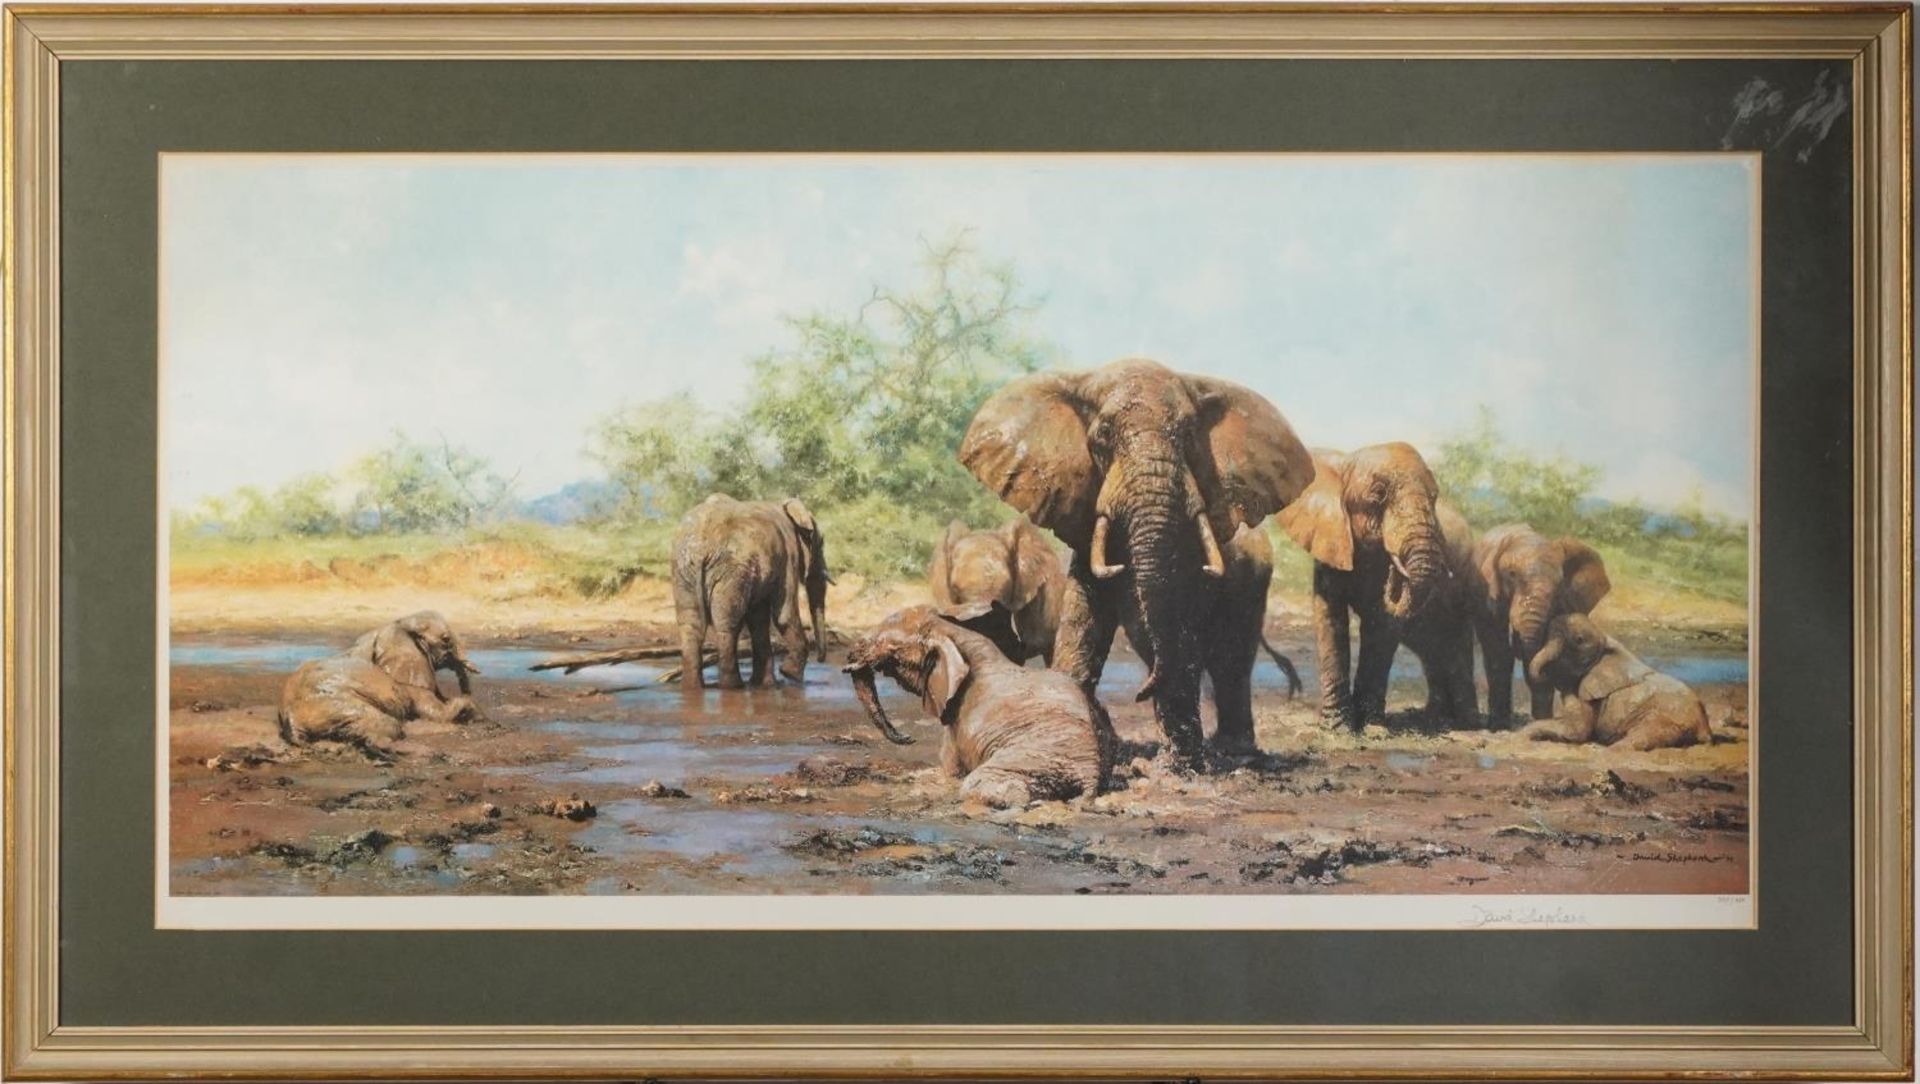 David Shepherd - Elephants, pencil signed print with embossed watermark, limited edition 357/850, - Image 2 of 5